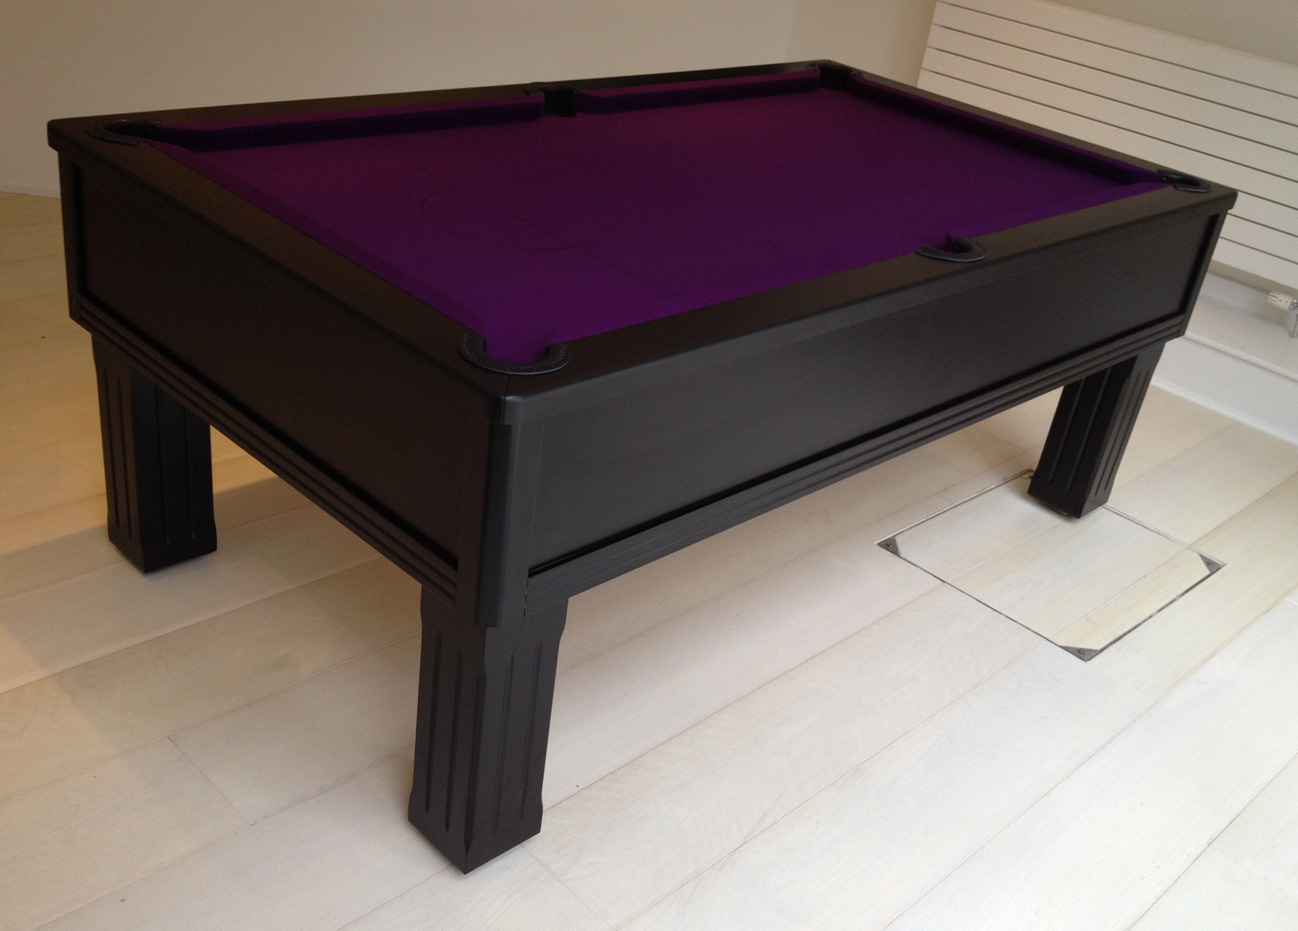 PURPLE 7x4 High Quality WOOL Pool Cloth To Fit All 7ft English Pool Tables 